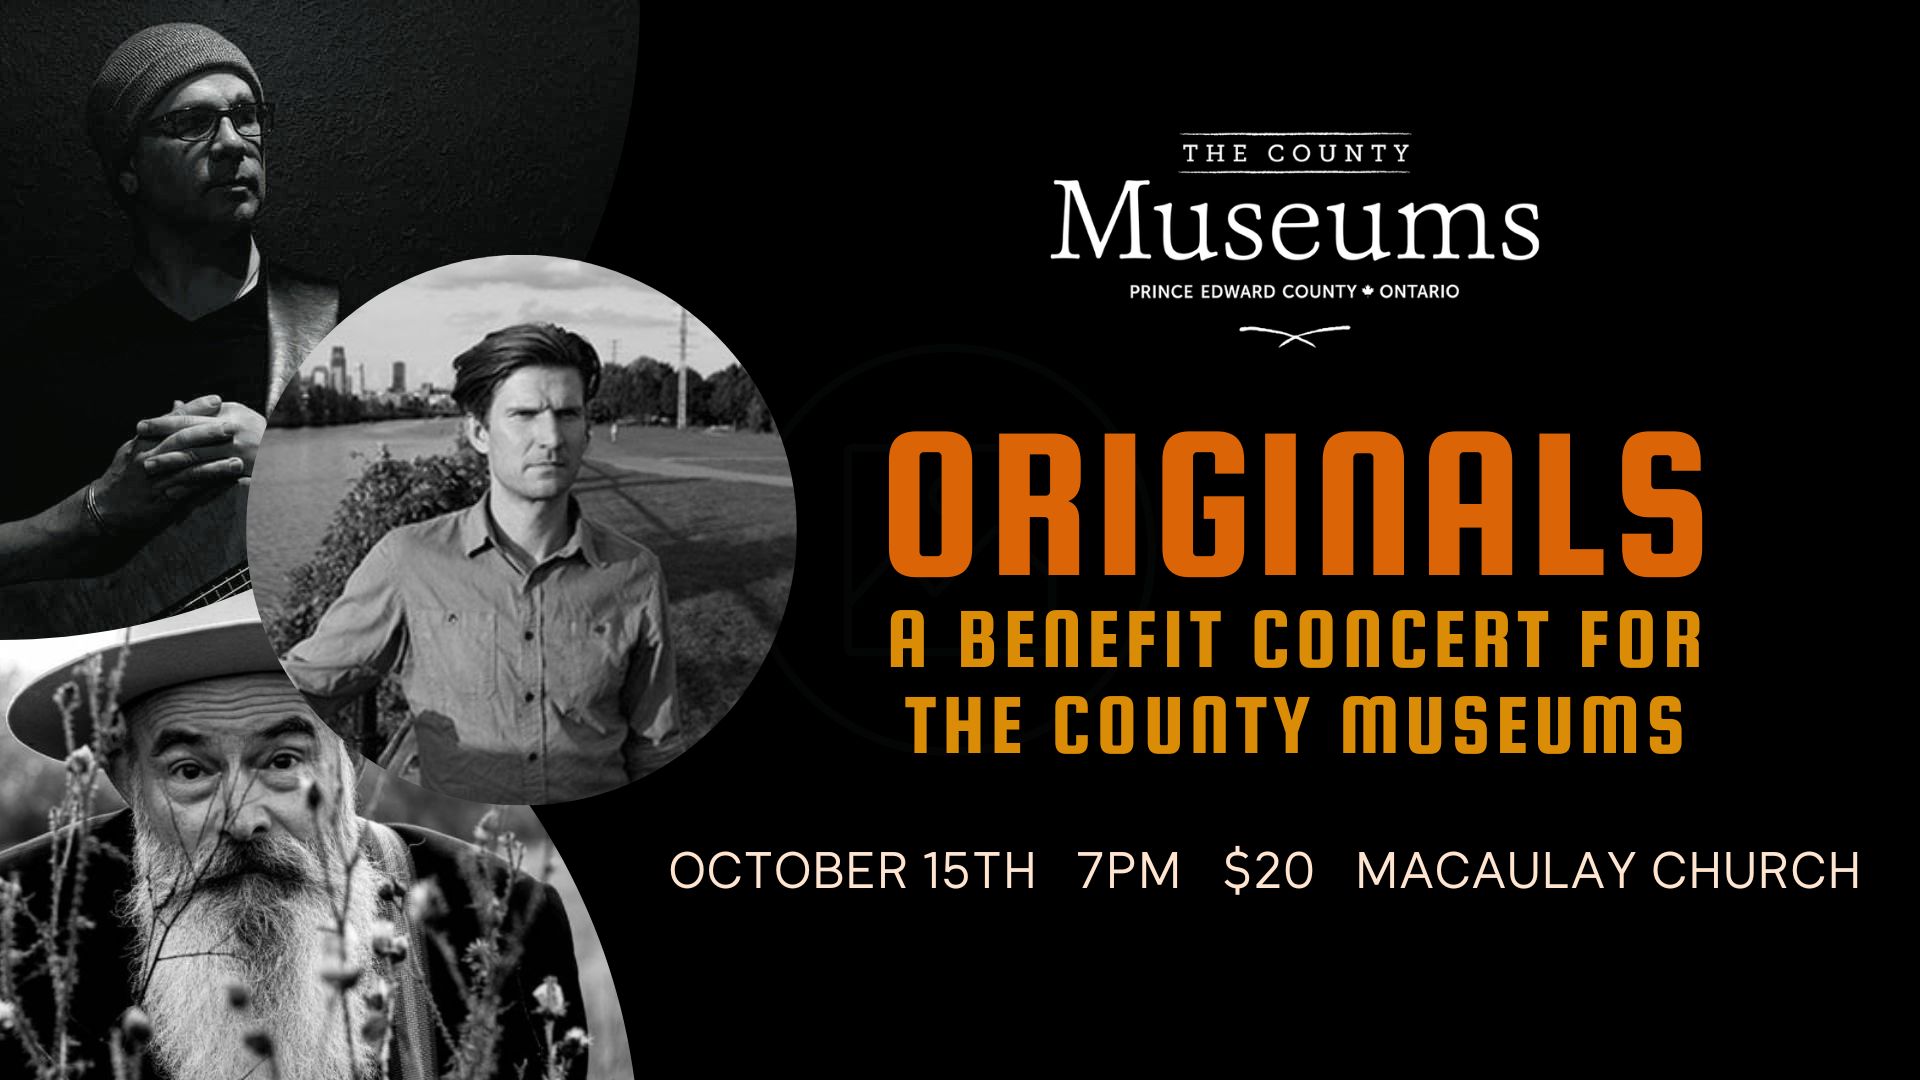 Originals: A Benefit Concert for The County Museums